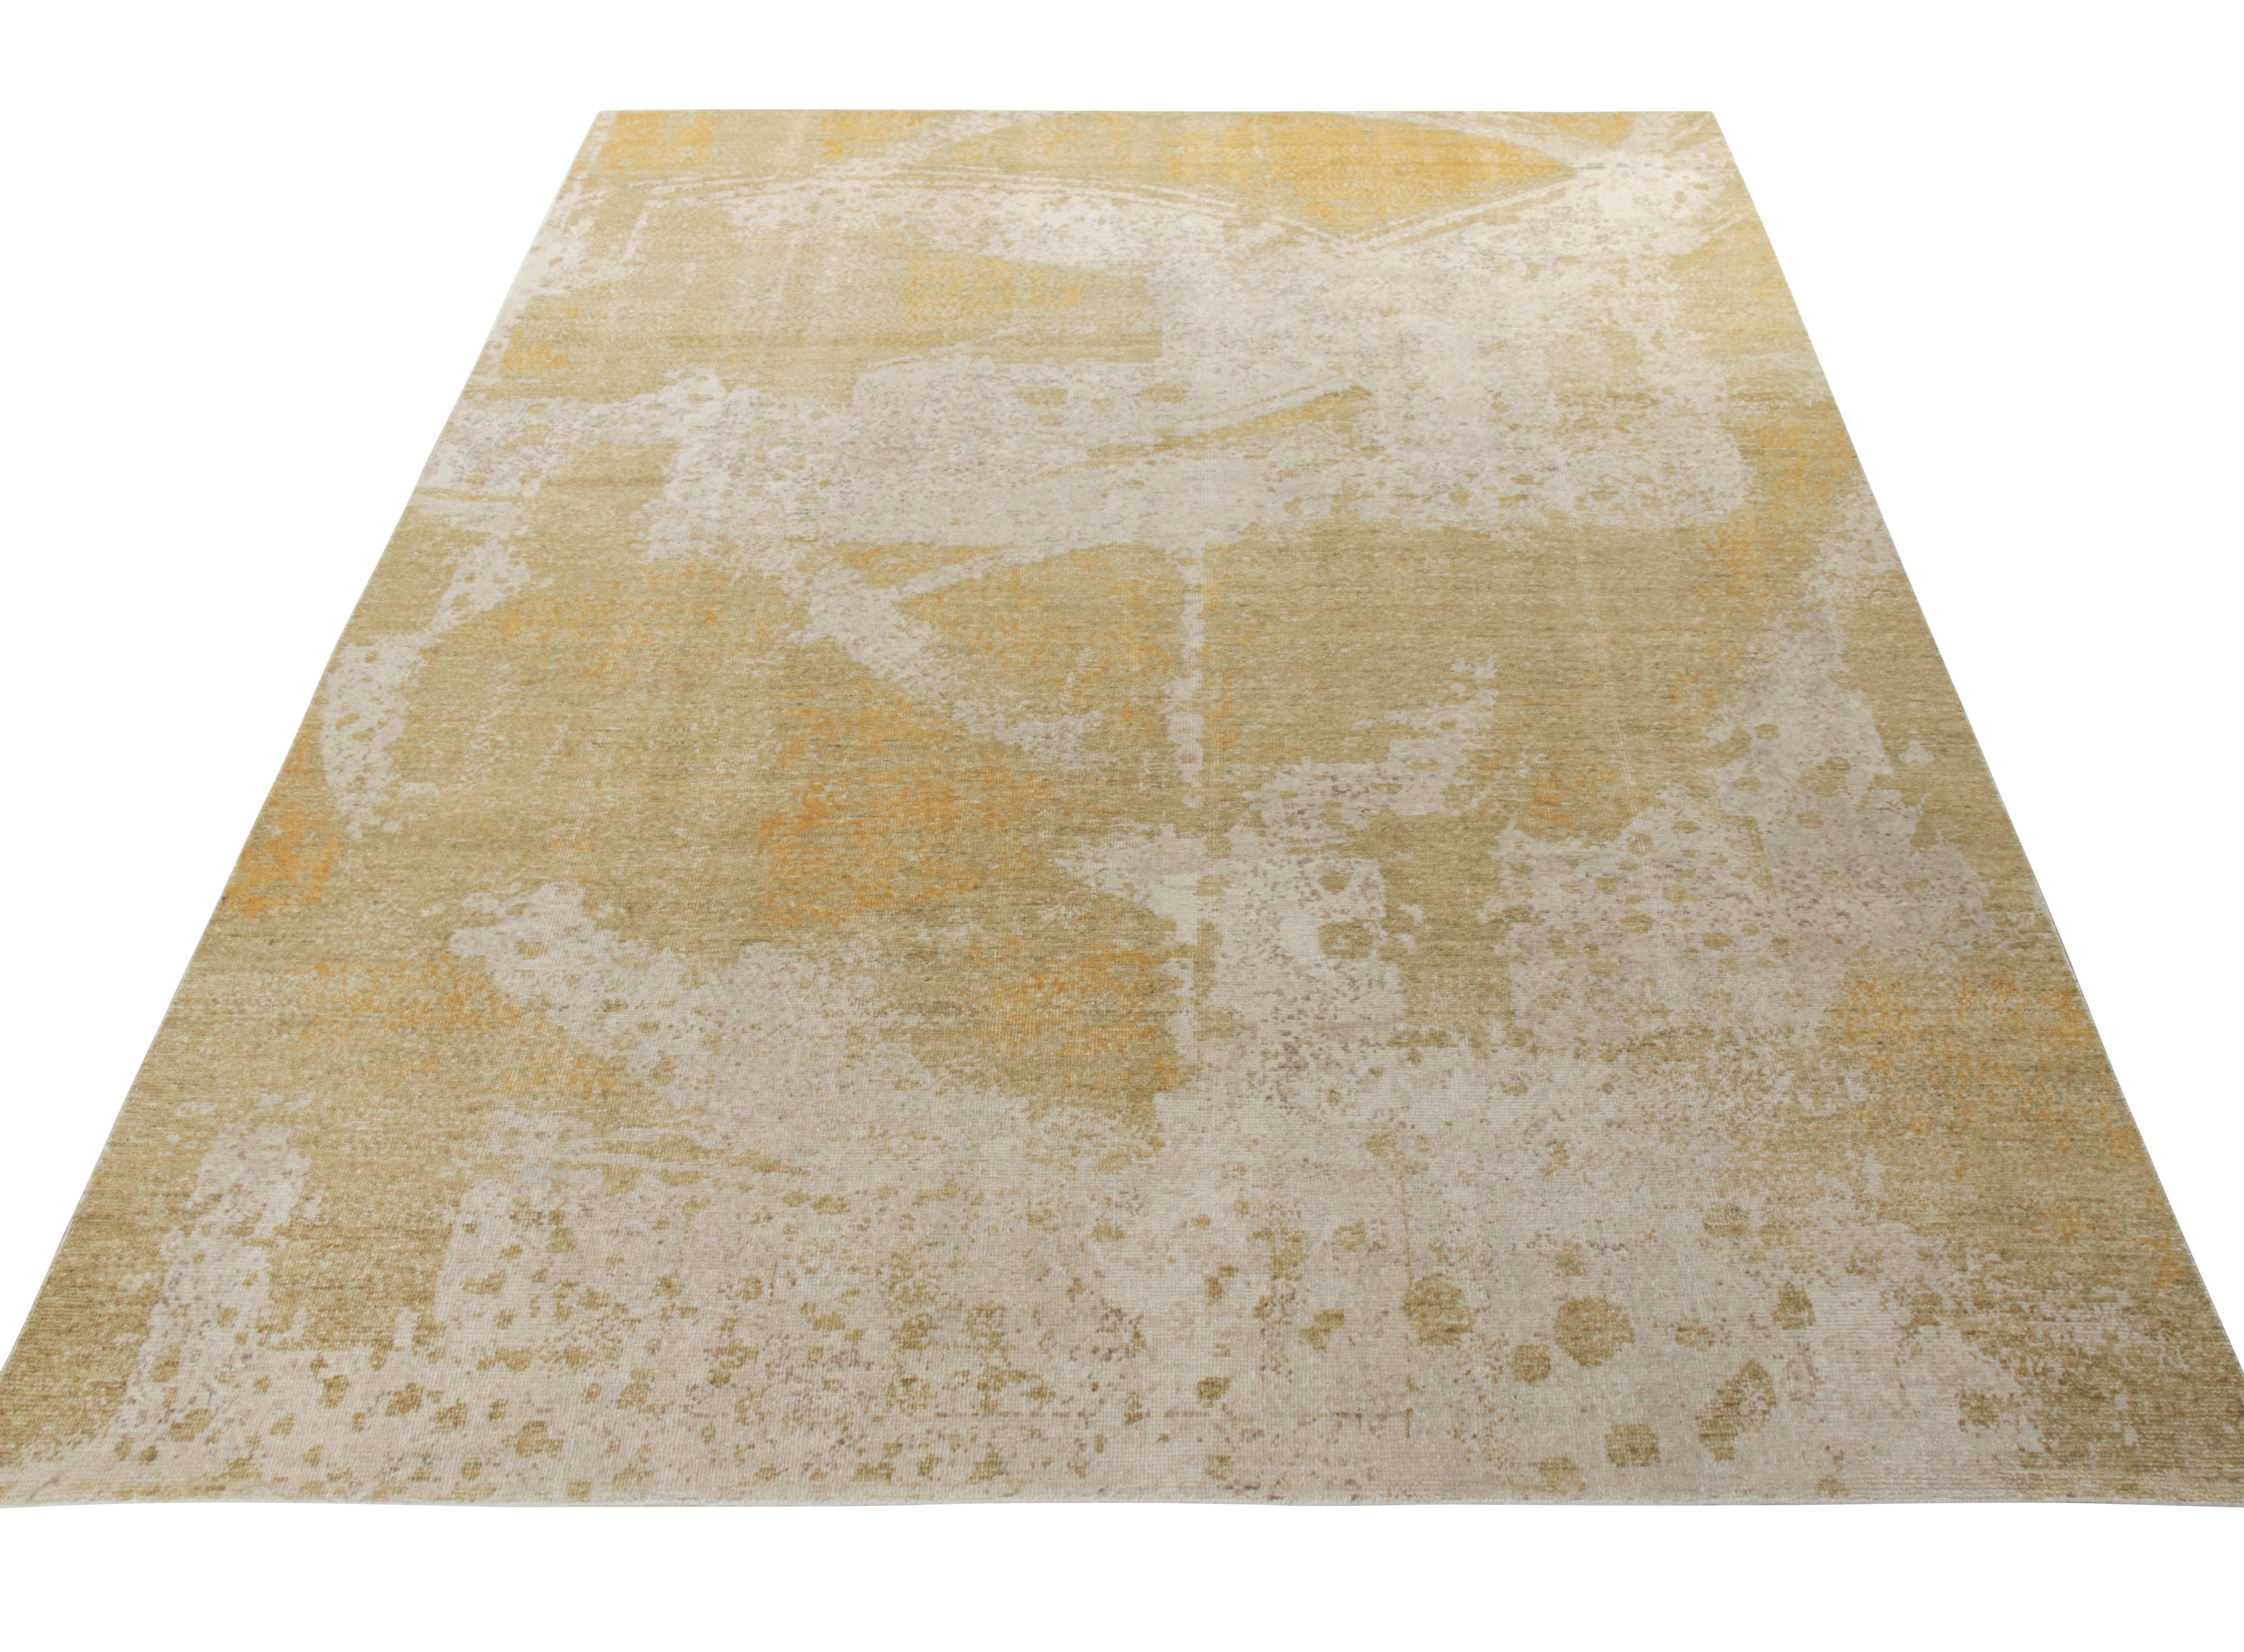 This 9 X 12 distressed style piece belongs to Rug & Kilim’s Homage collection. Hand-knotted in fine quality yarn wool, this beige-brown and gold creation embraces a modern theme donning an original abstract from our own Nikita Nagpal’s most exciting